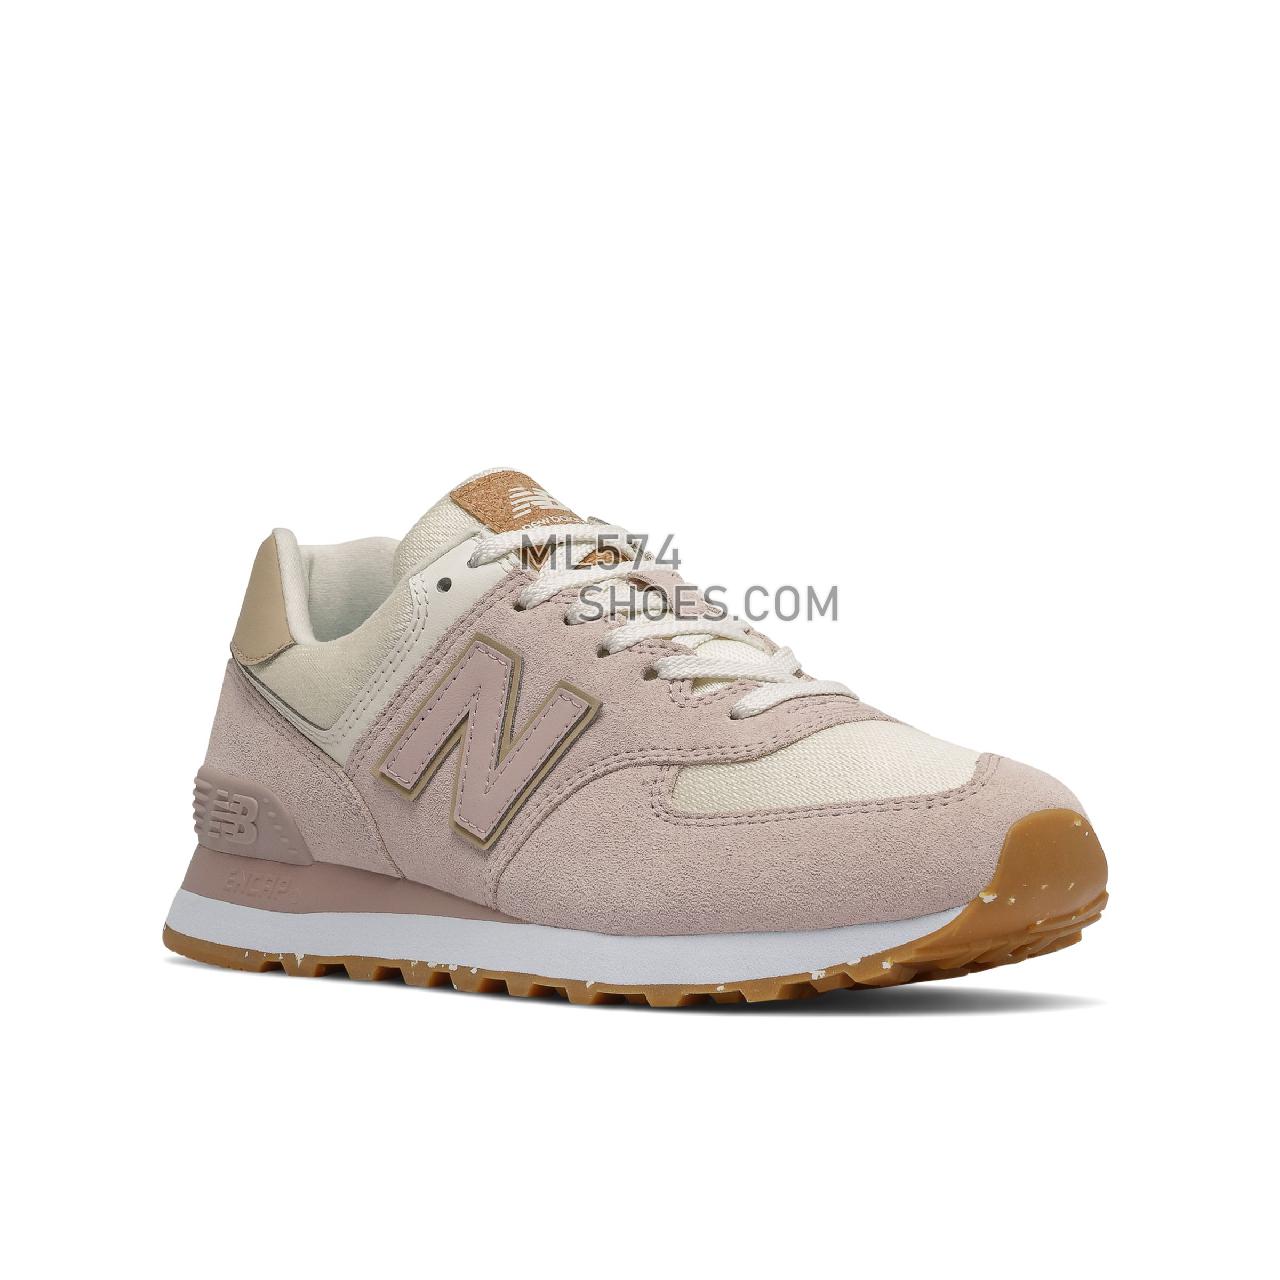 New Balance 574 - Women's Classic Sneakers - Space Pink with Angora - WL574SP2